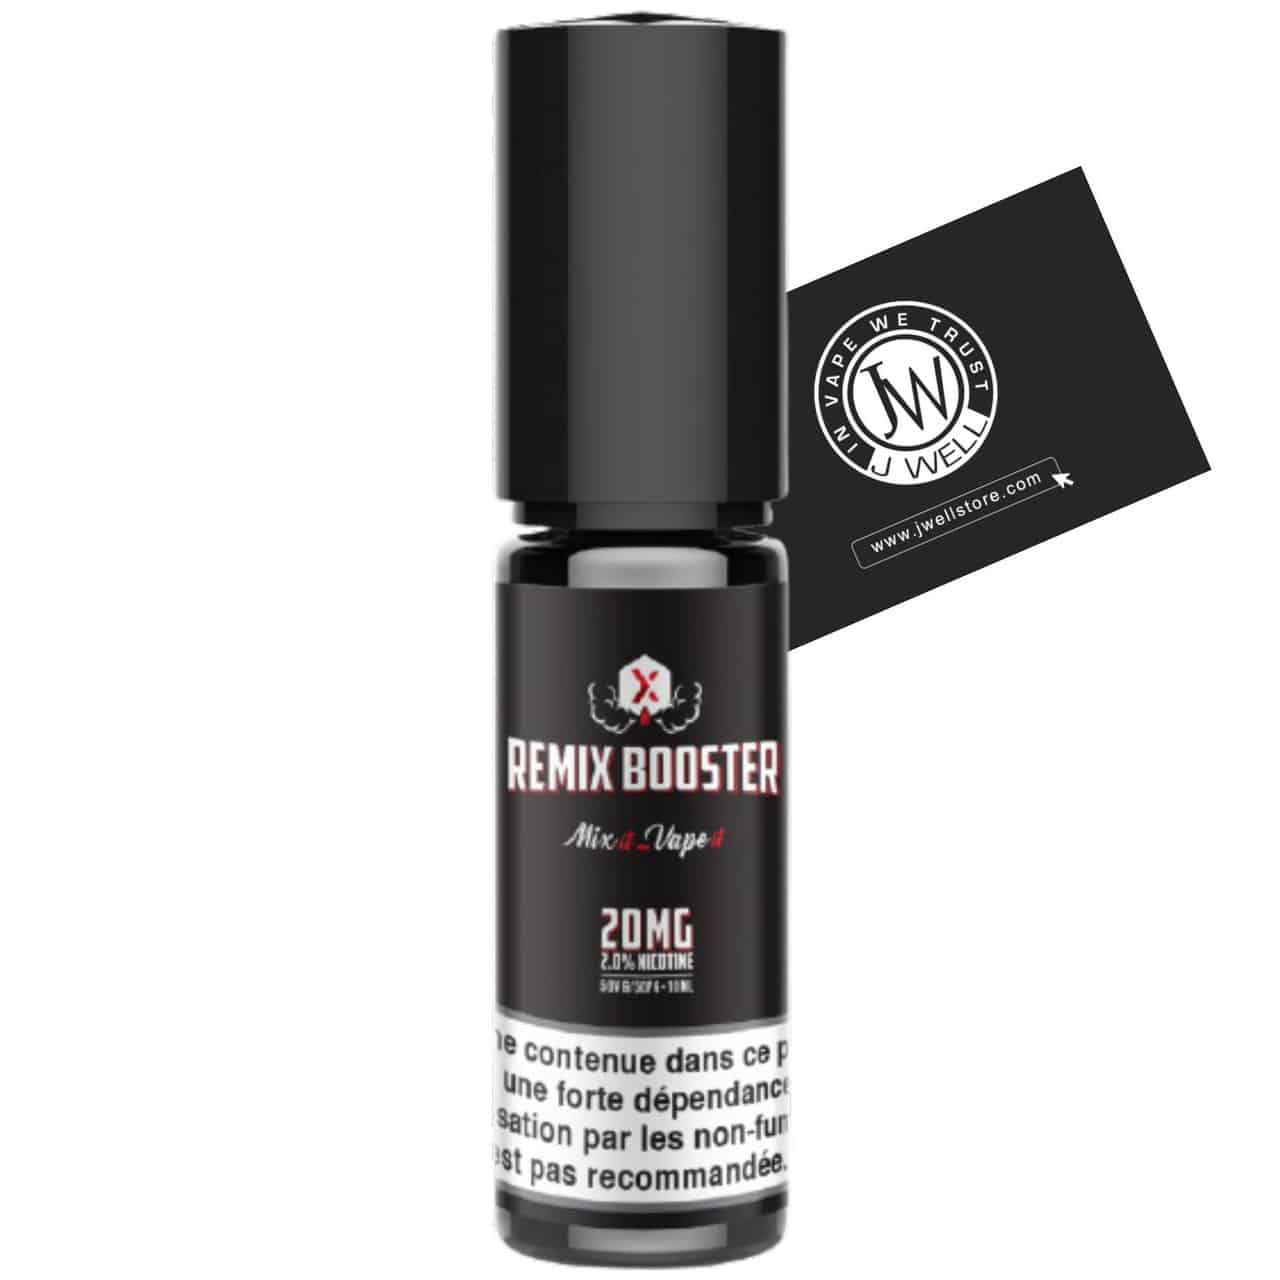 Image Booster aux Sels de Nicotine | Remix Booster